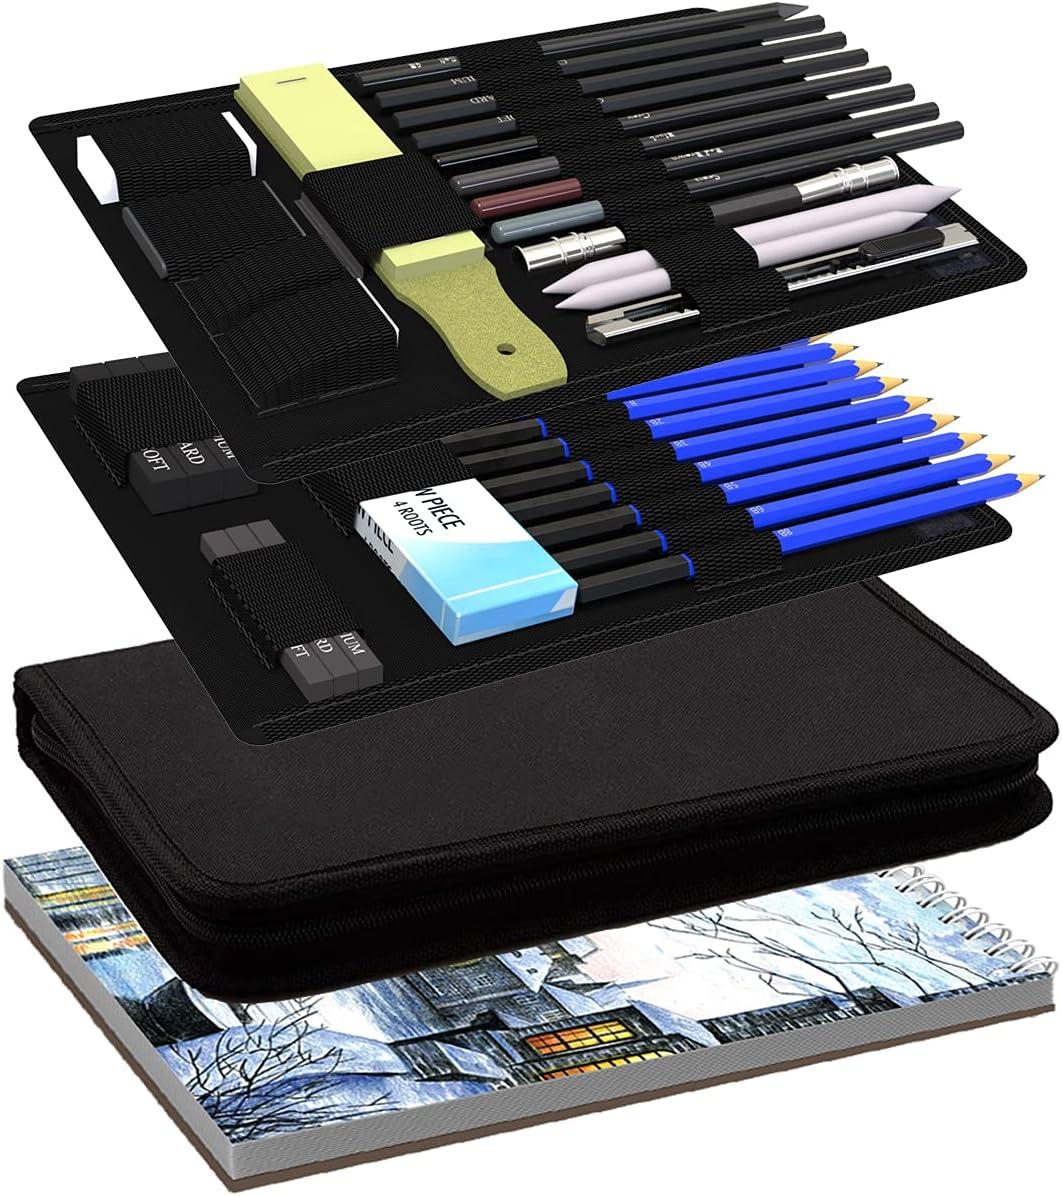  Sketch Pencils Set with Sketchbook, 41-Piece Professional Drawing  Set and a 50-Sheet Pad for Kids, Teens And Adults, Complete Artist Kit  Includes Pencils, Erasers, Pastels, A Handy Case etc. 